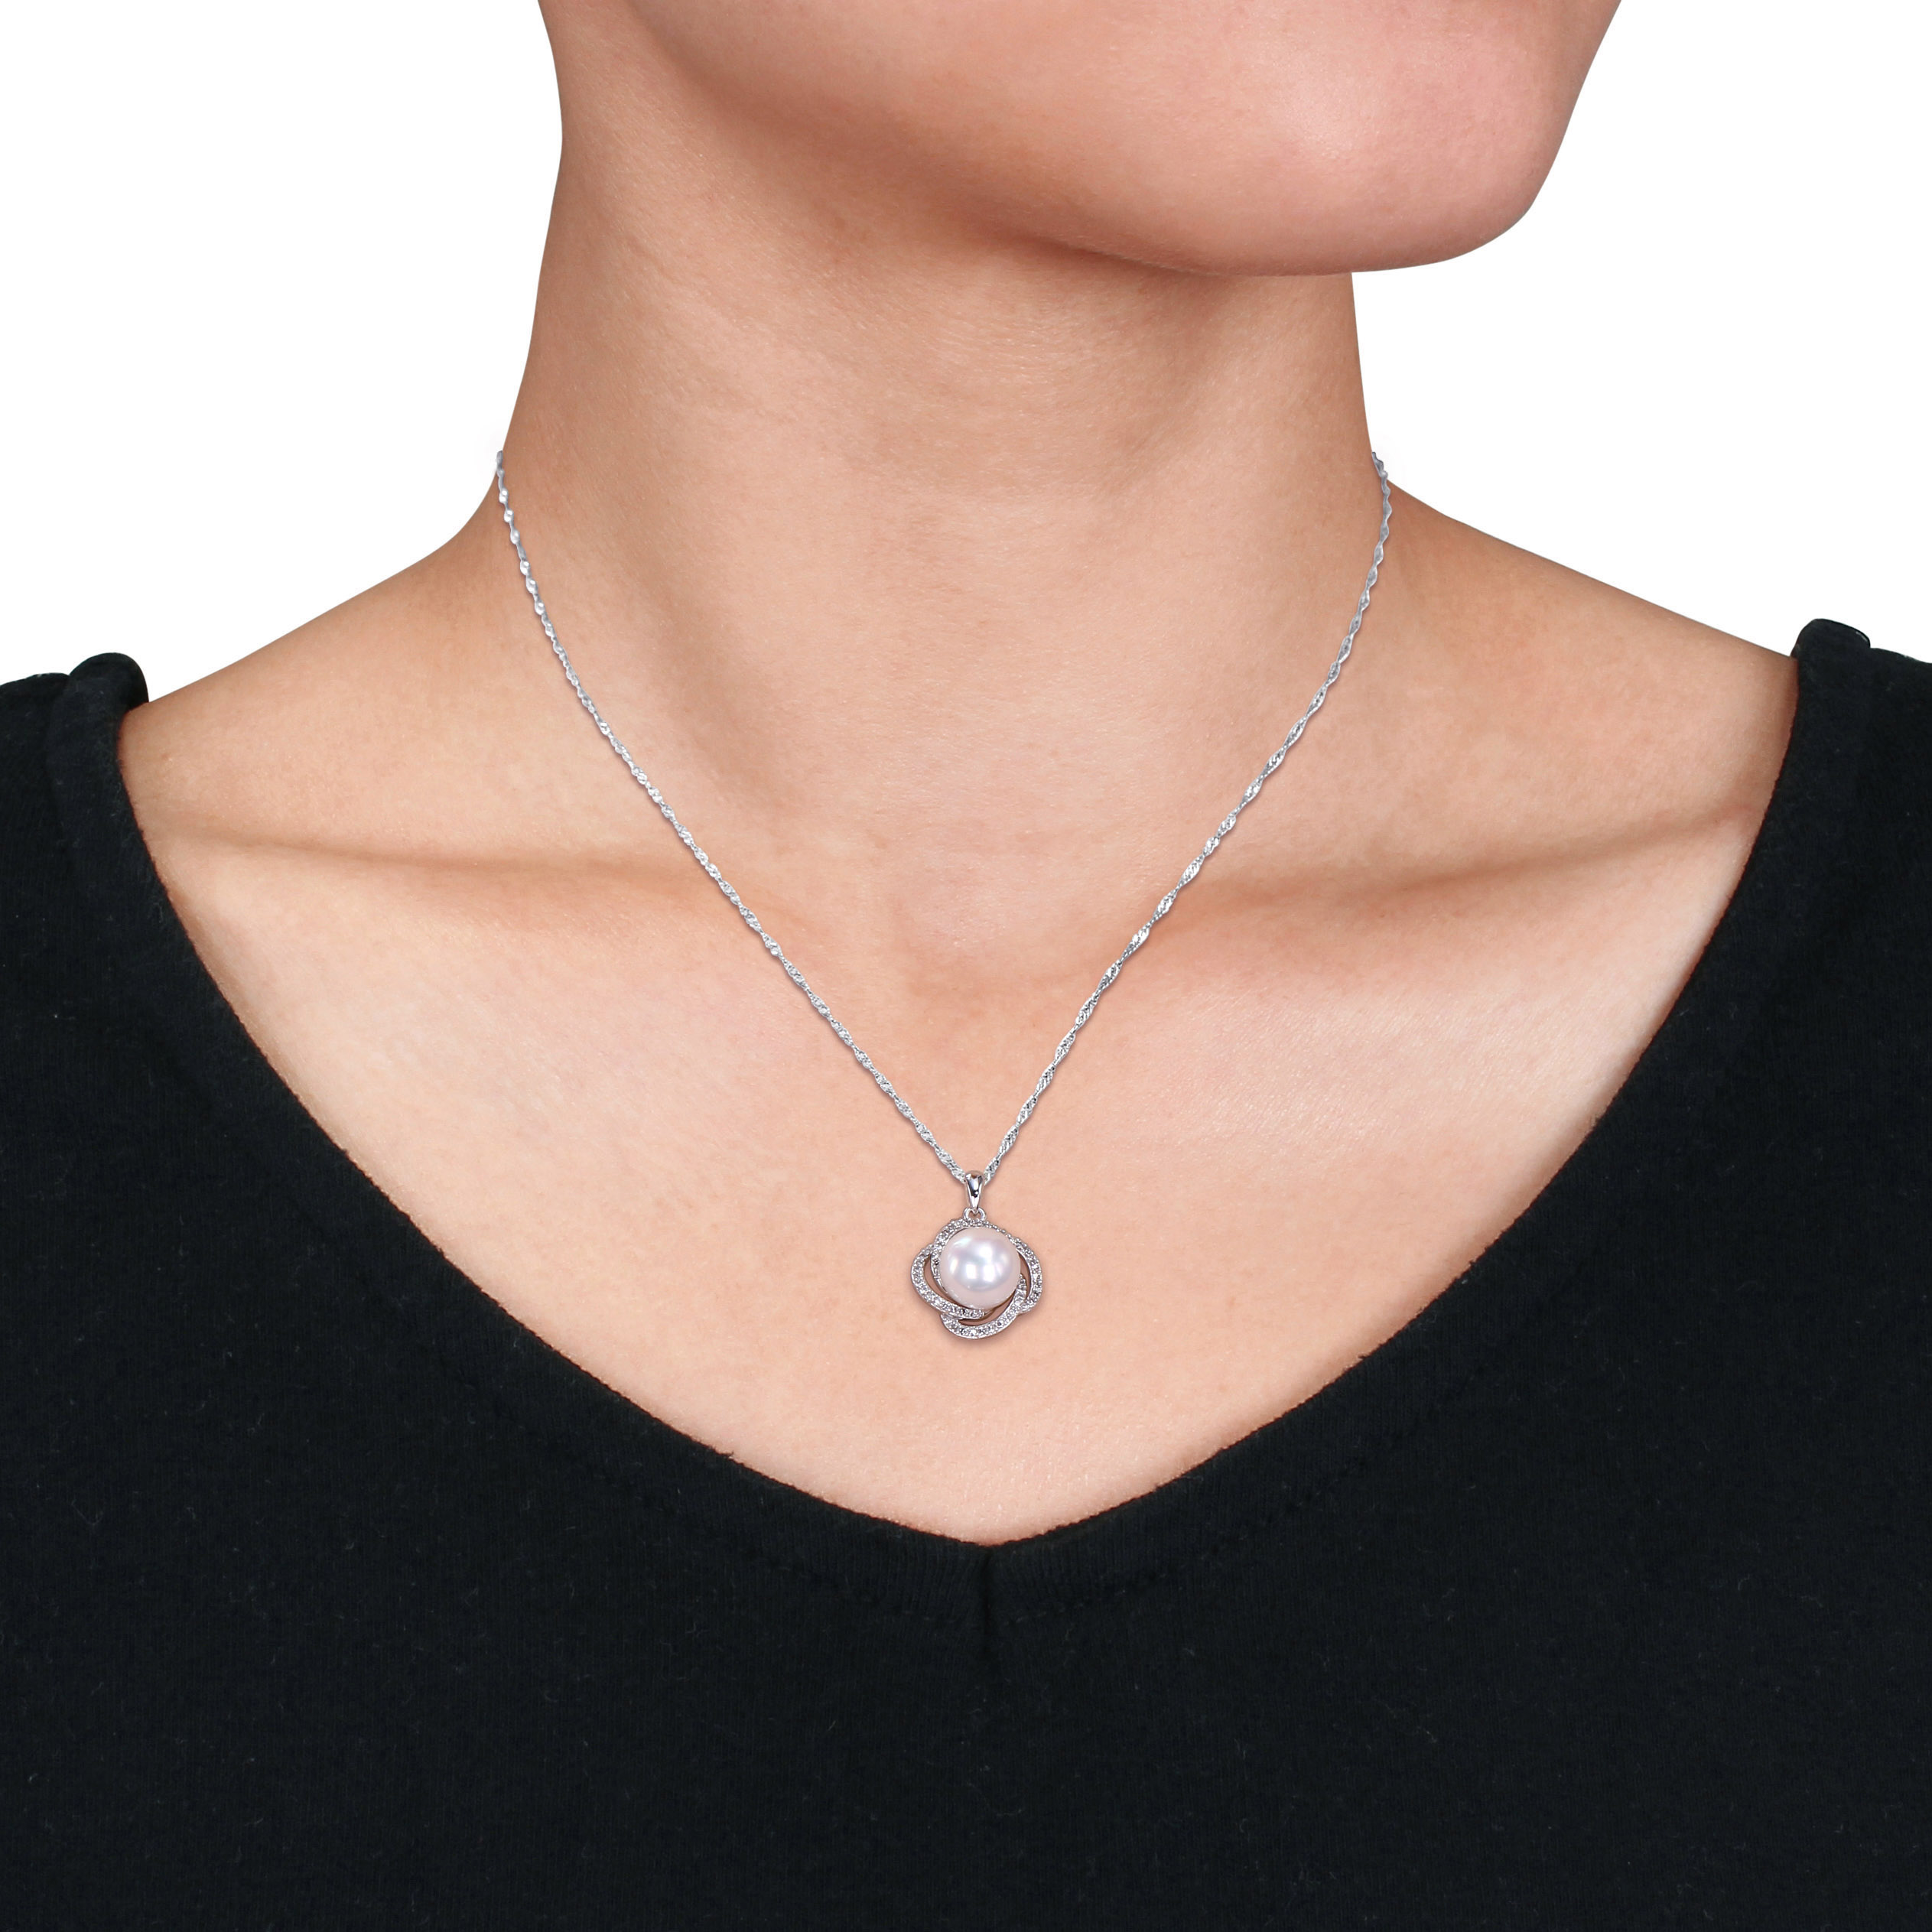 10-10.5 MM Cultured Freshwater Pearl and 1/4 CT TW Diamond Swirl Necklace in 14k White Gold